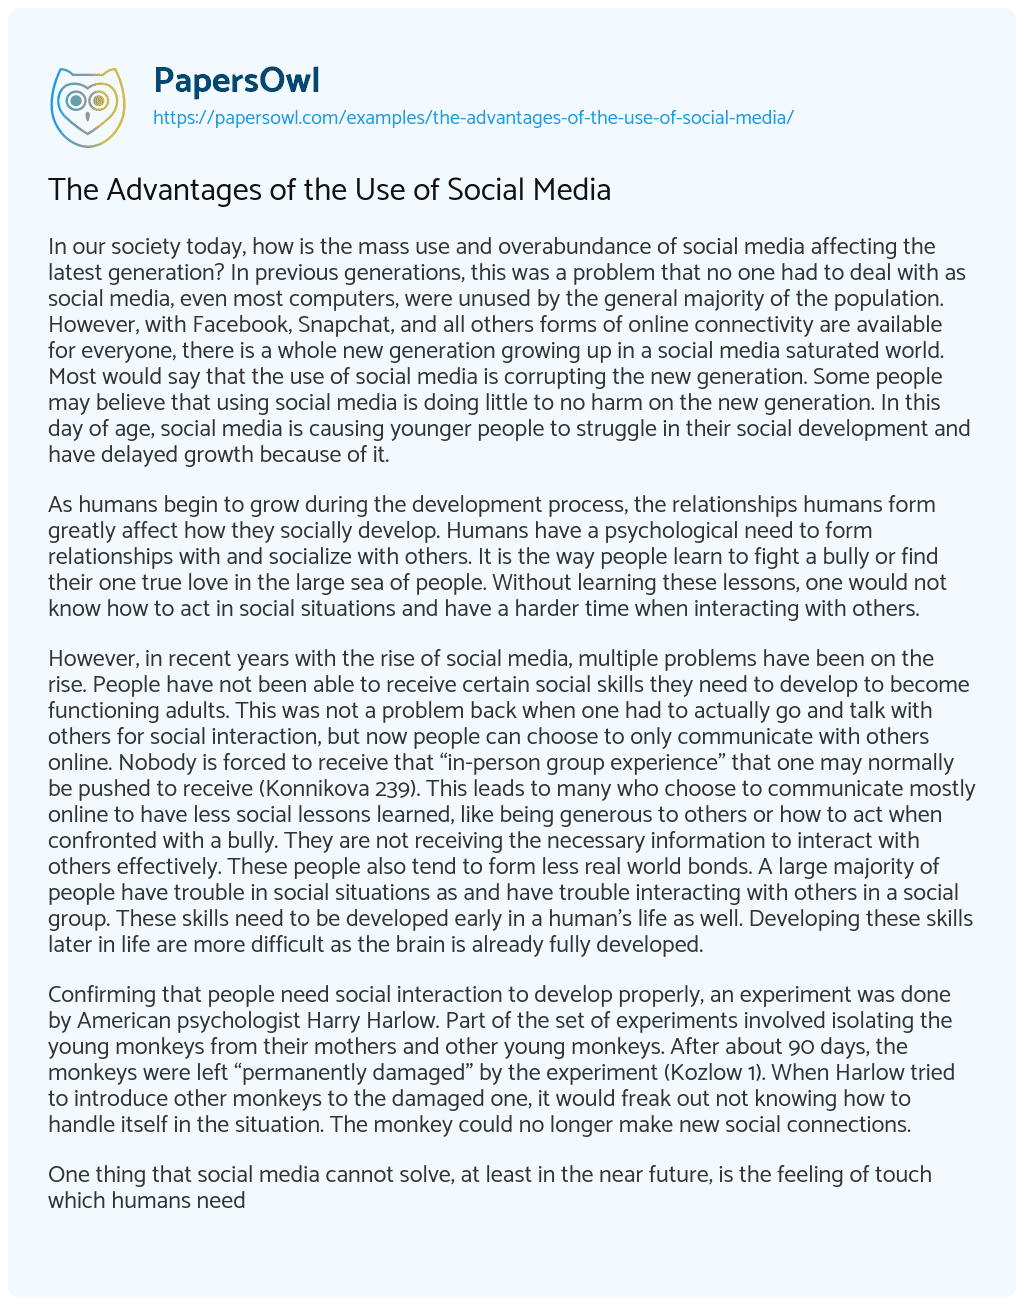 Essay on The Advantages of the Use of Social Media